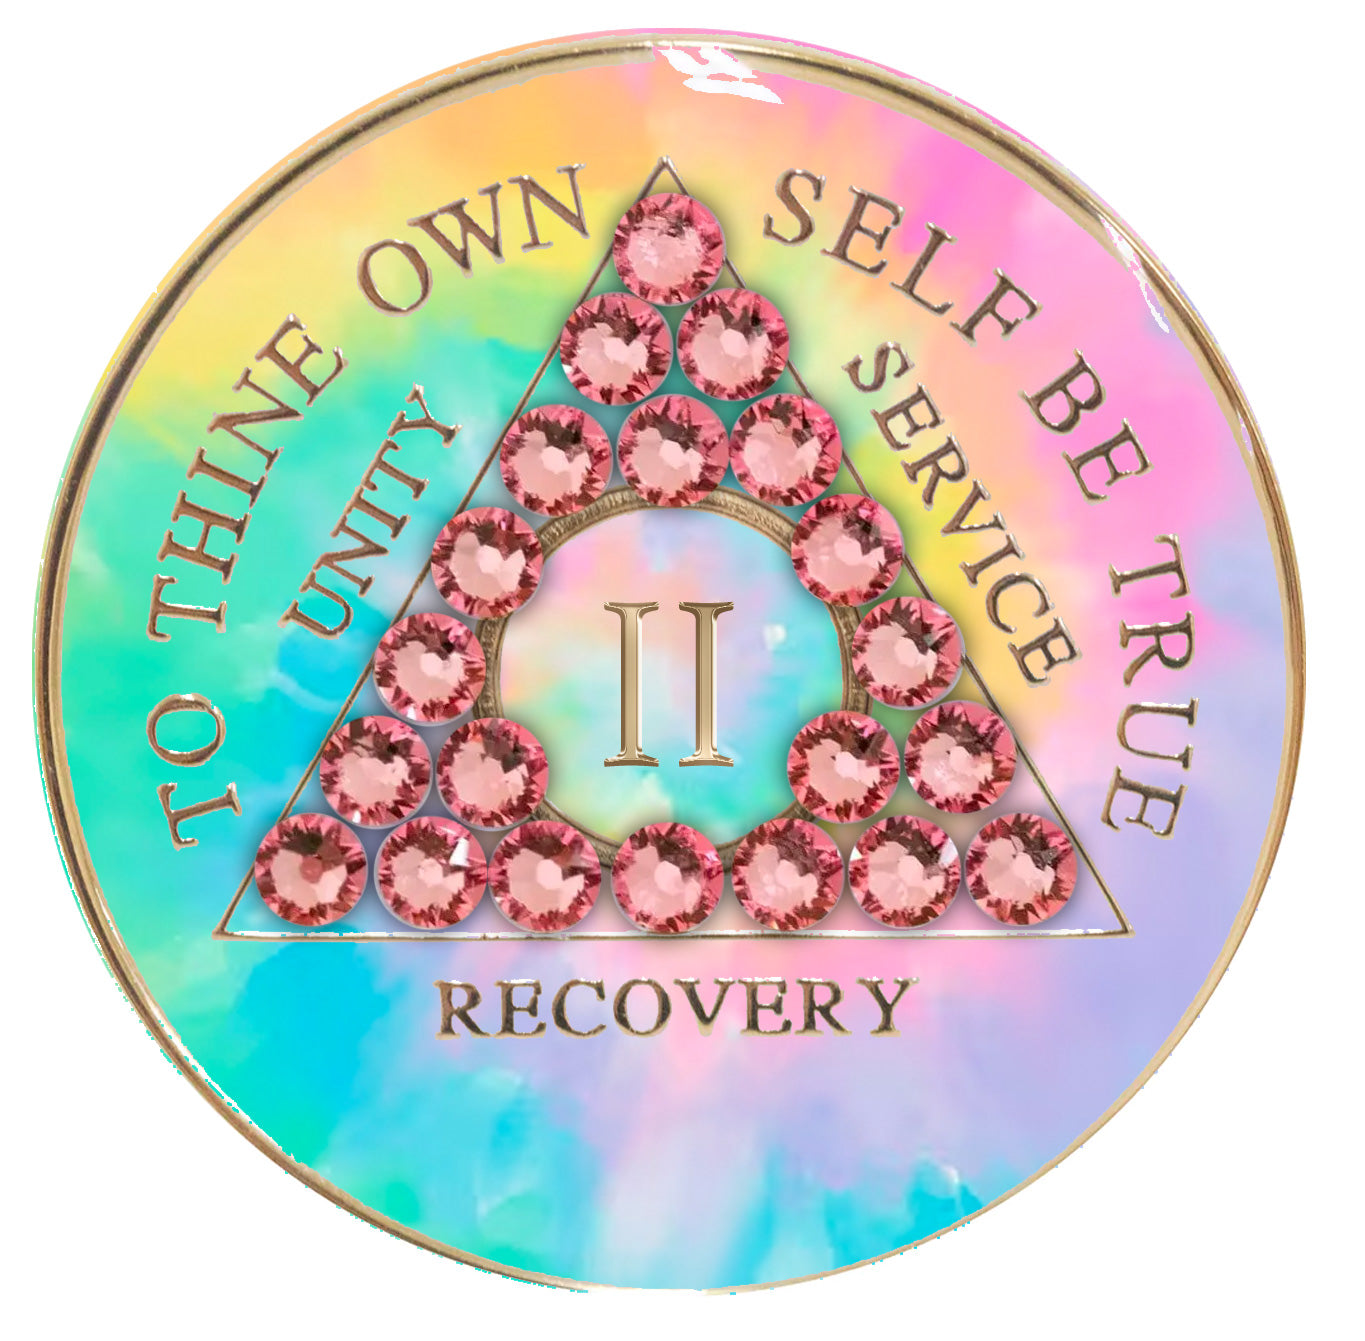 2 year AA medallion pastel tie-dye representing a psychic change that is needed in the recovery journey, with twenty-one light rose genuine crystals, pink, blue, yellow, and green, in the shape of the triangle, with the AA moto and roman numeral embossed in 14k gold-plated brass, the medallion is sealed with resin for a glossy, scratch free finish.